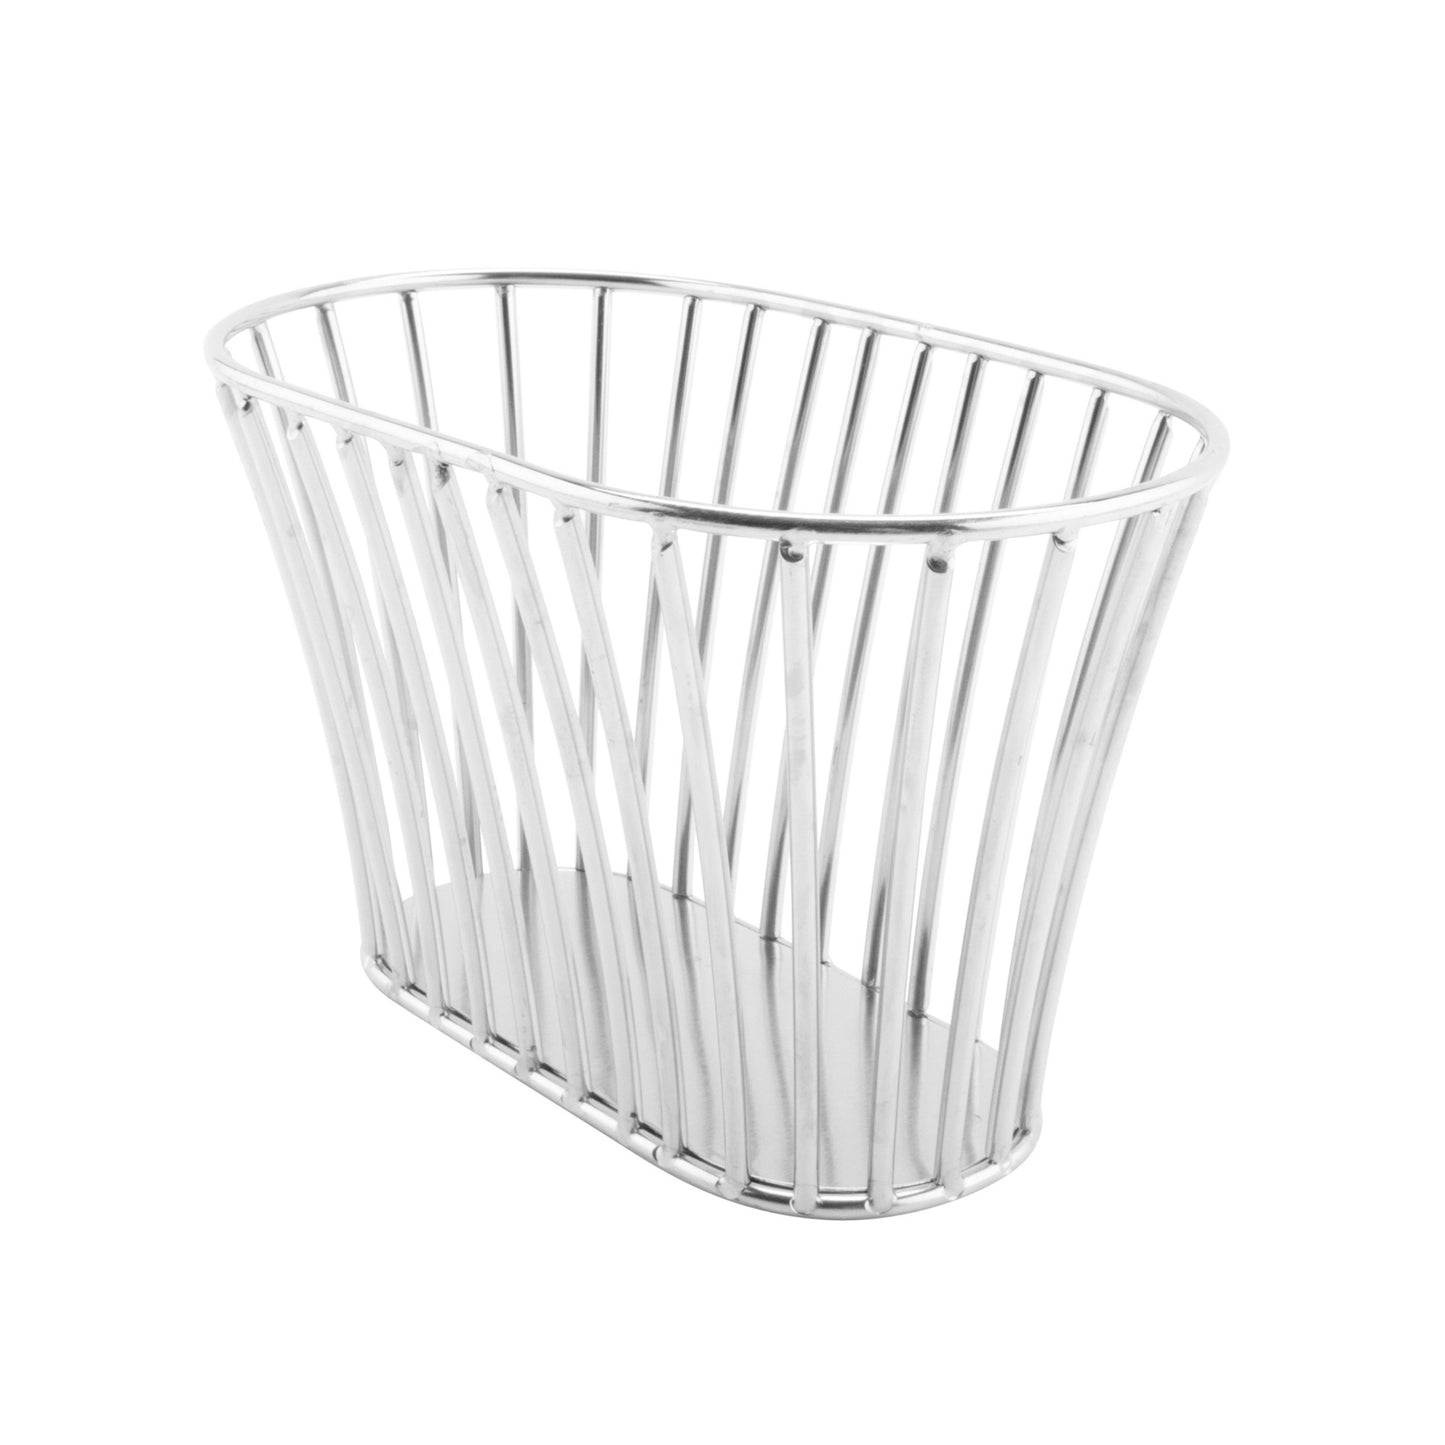 8.25" x 5" Stackable Oval Tuscan Basket, 5" Tall